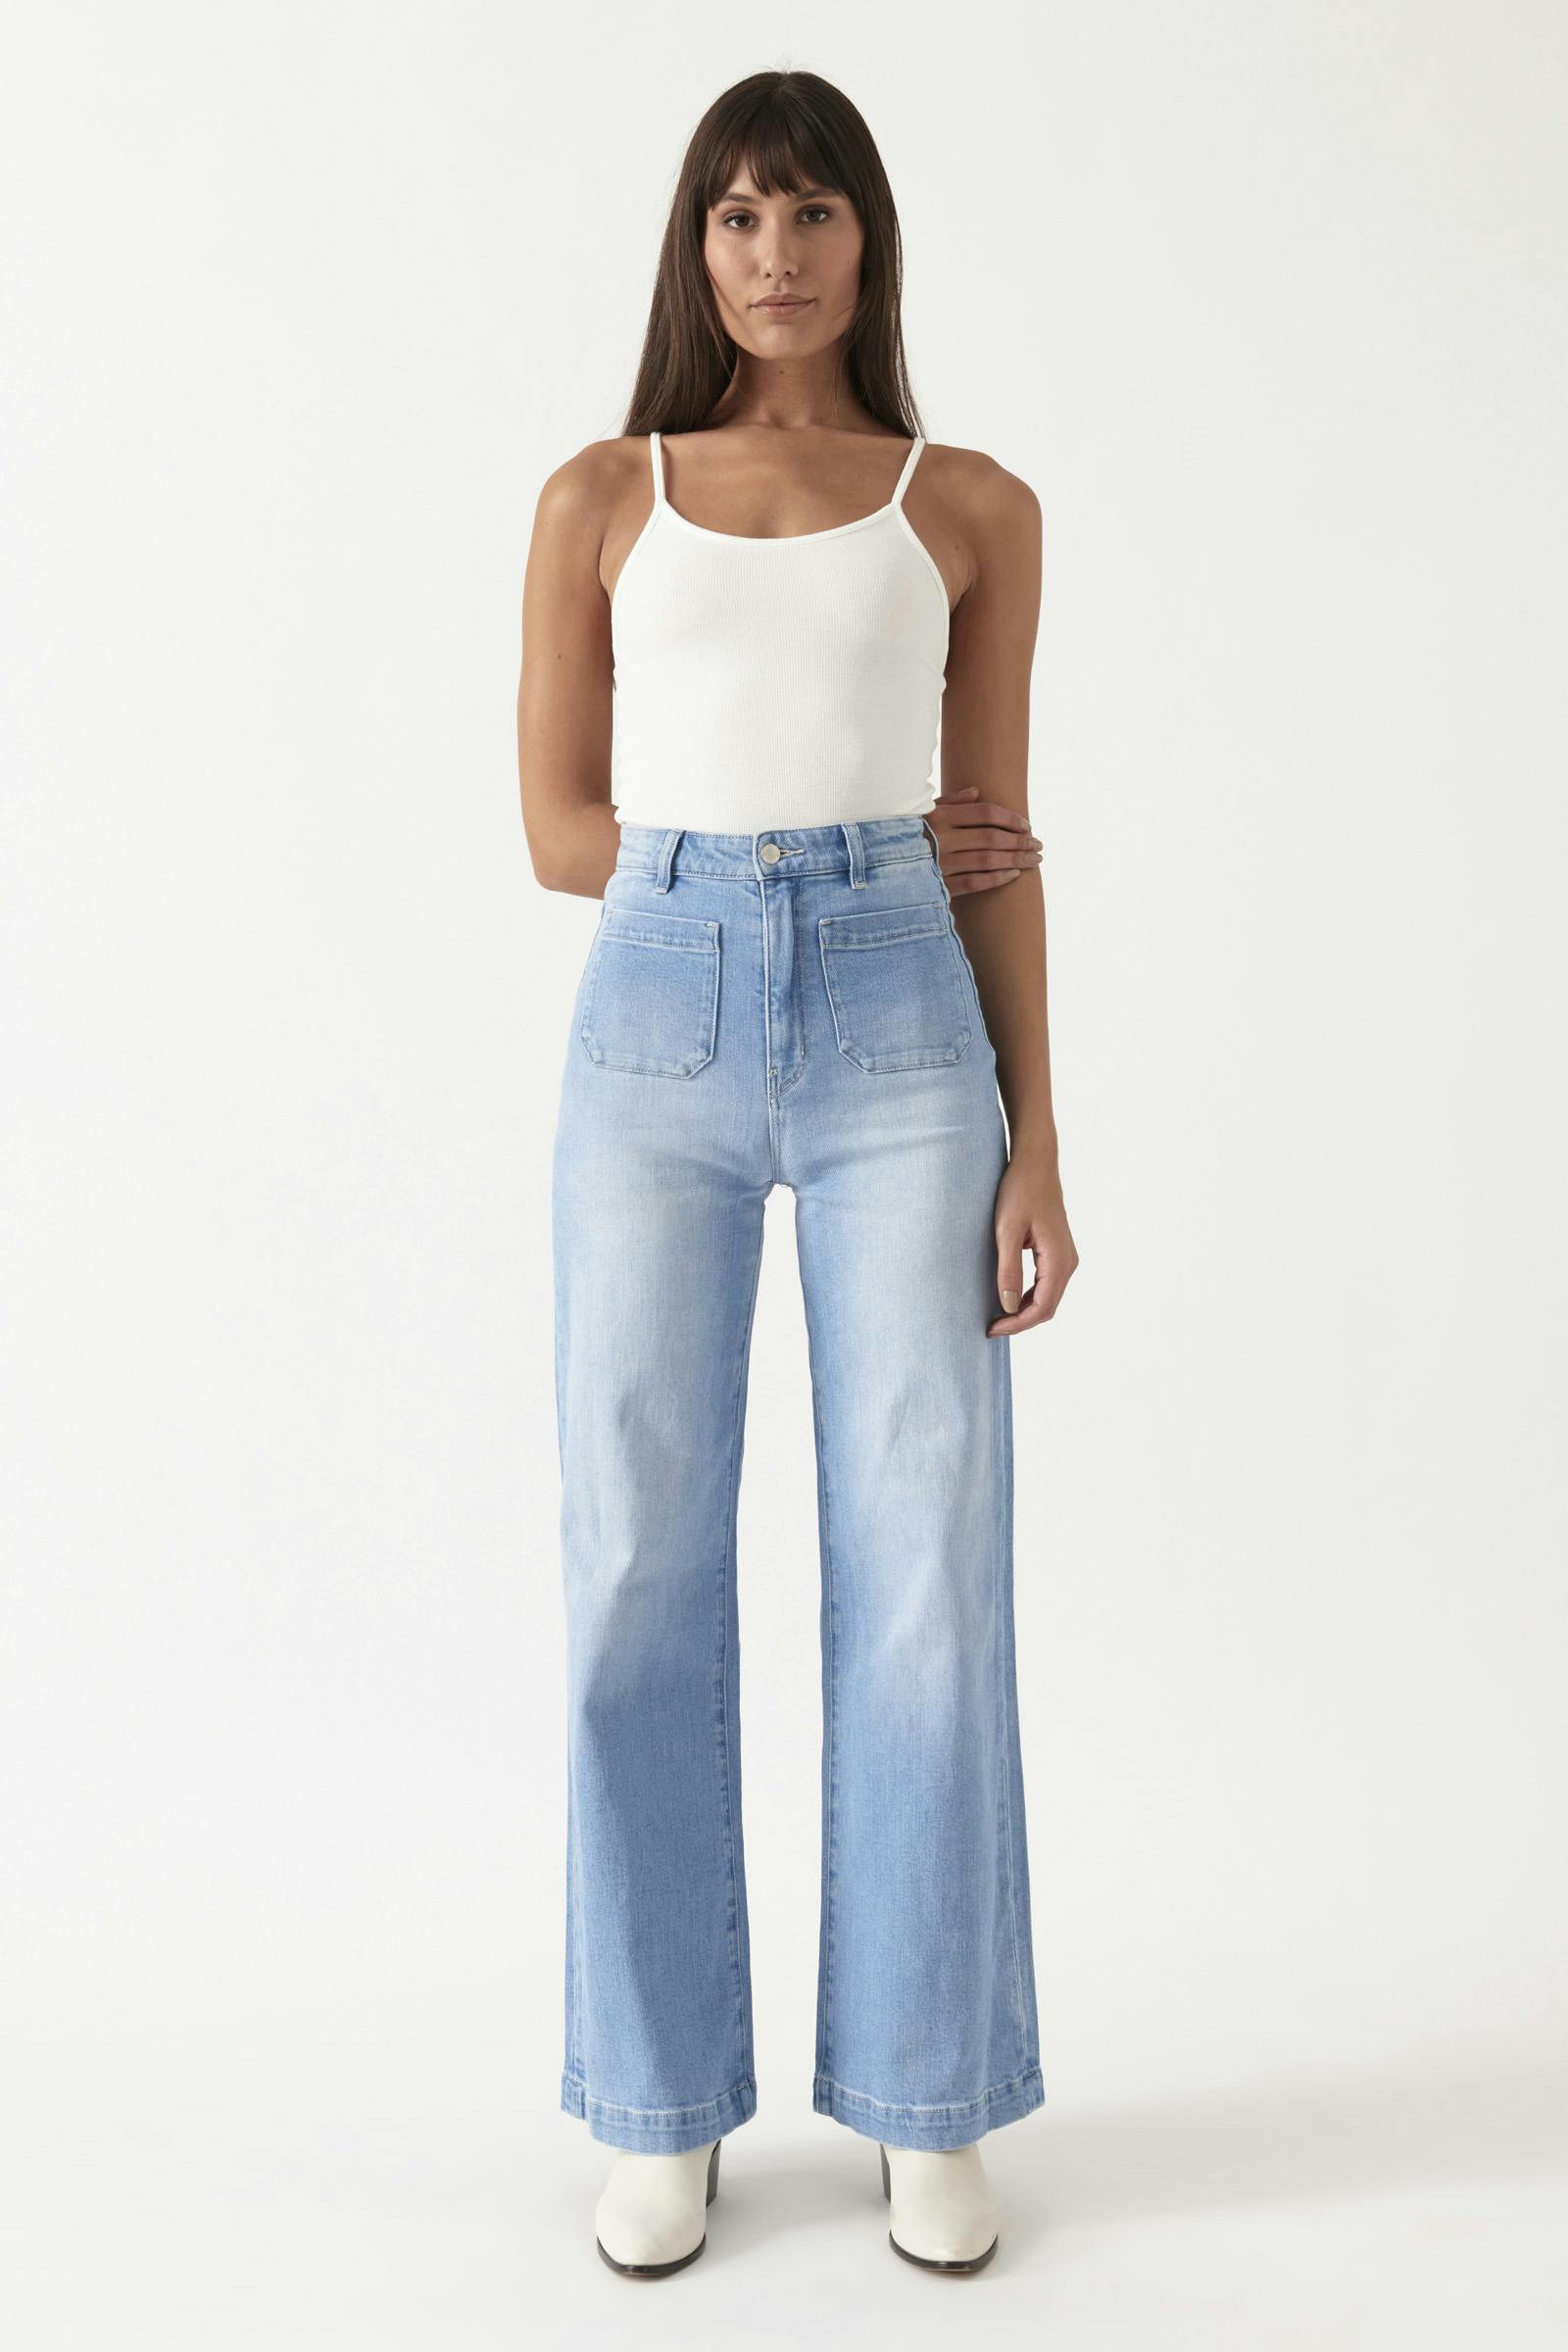 Free People Rolla's Sailor Jeans High Waist Bnwt Size 26 8